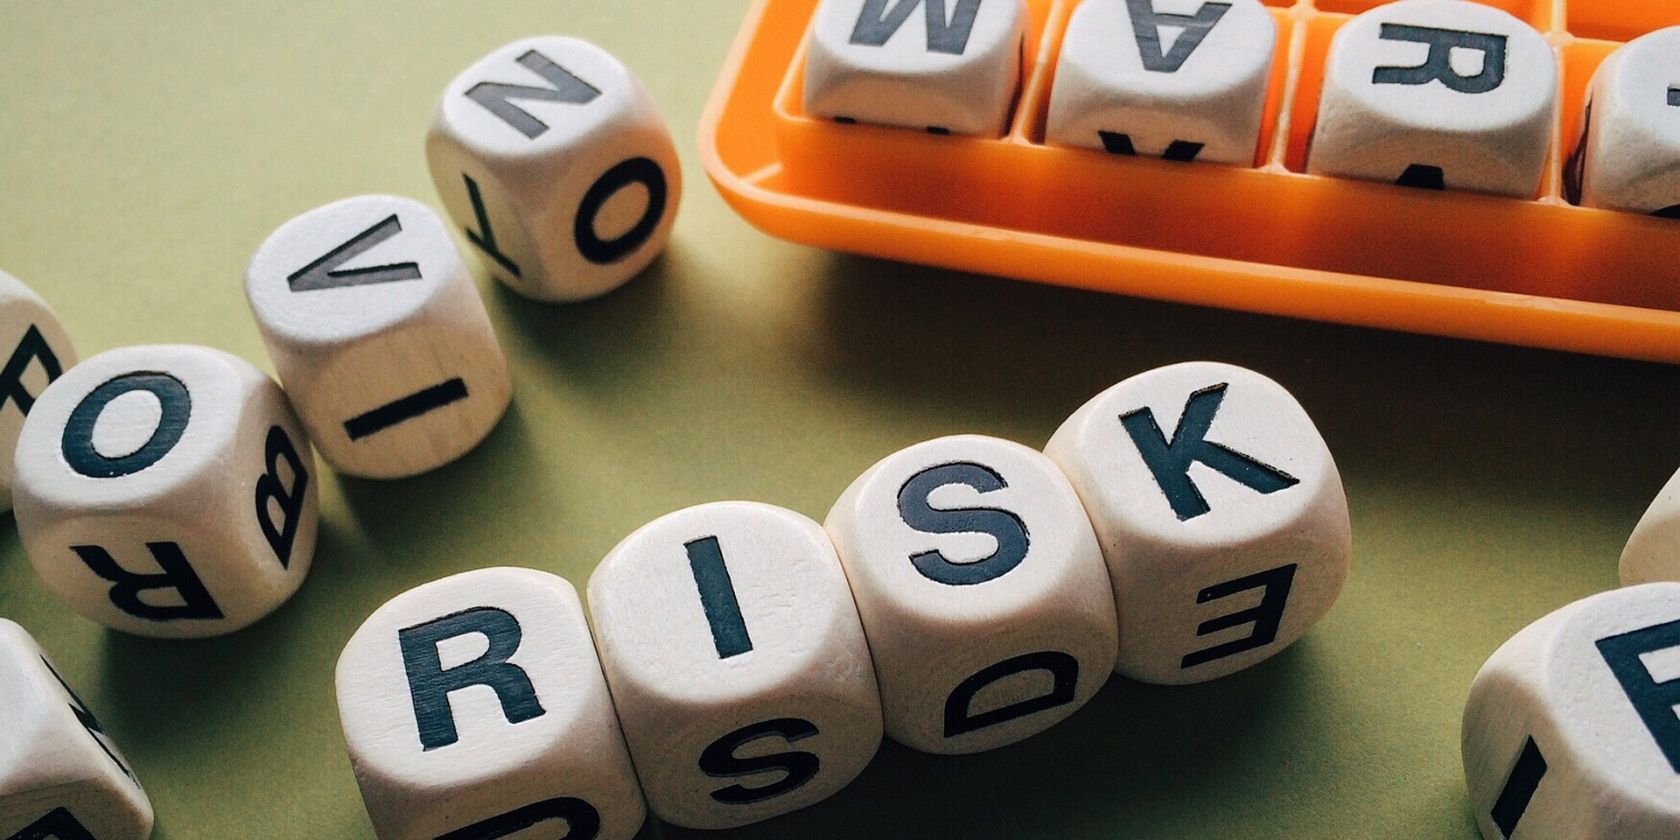 Dies with leters on them spelling out the word Risk